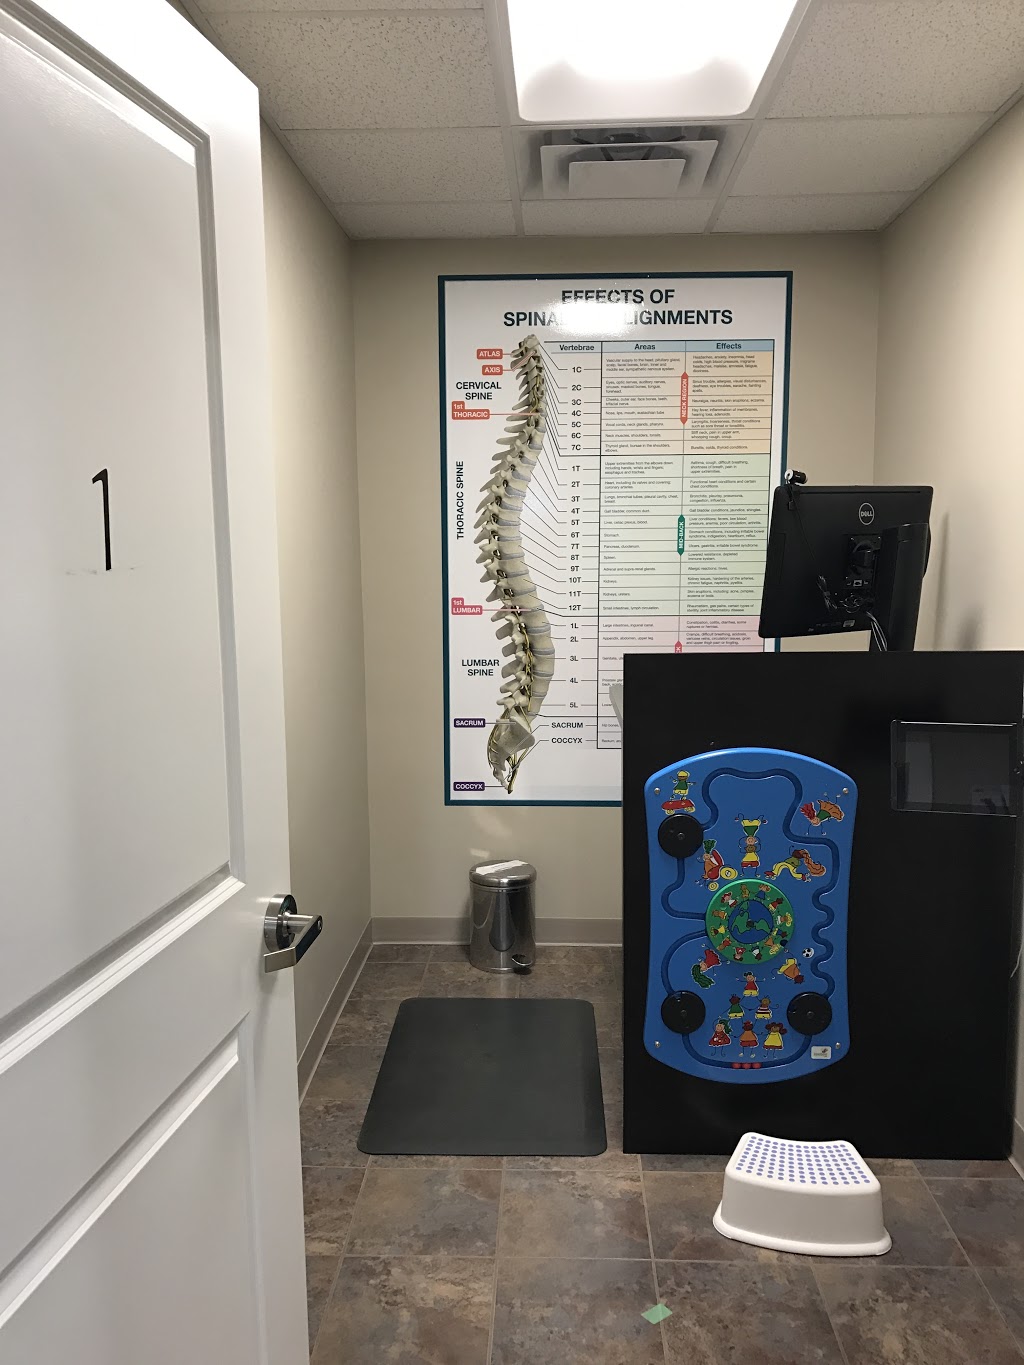 Inside-Out Chiropractic Center | health | 3550 76 Ave NW, Edmonton, AB T6B 2N8, Canada | 7804624243 OR +1 780-462-4243